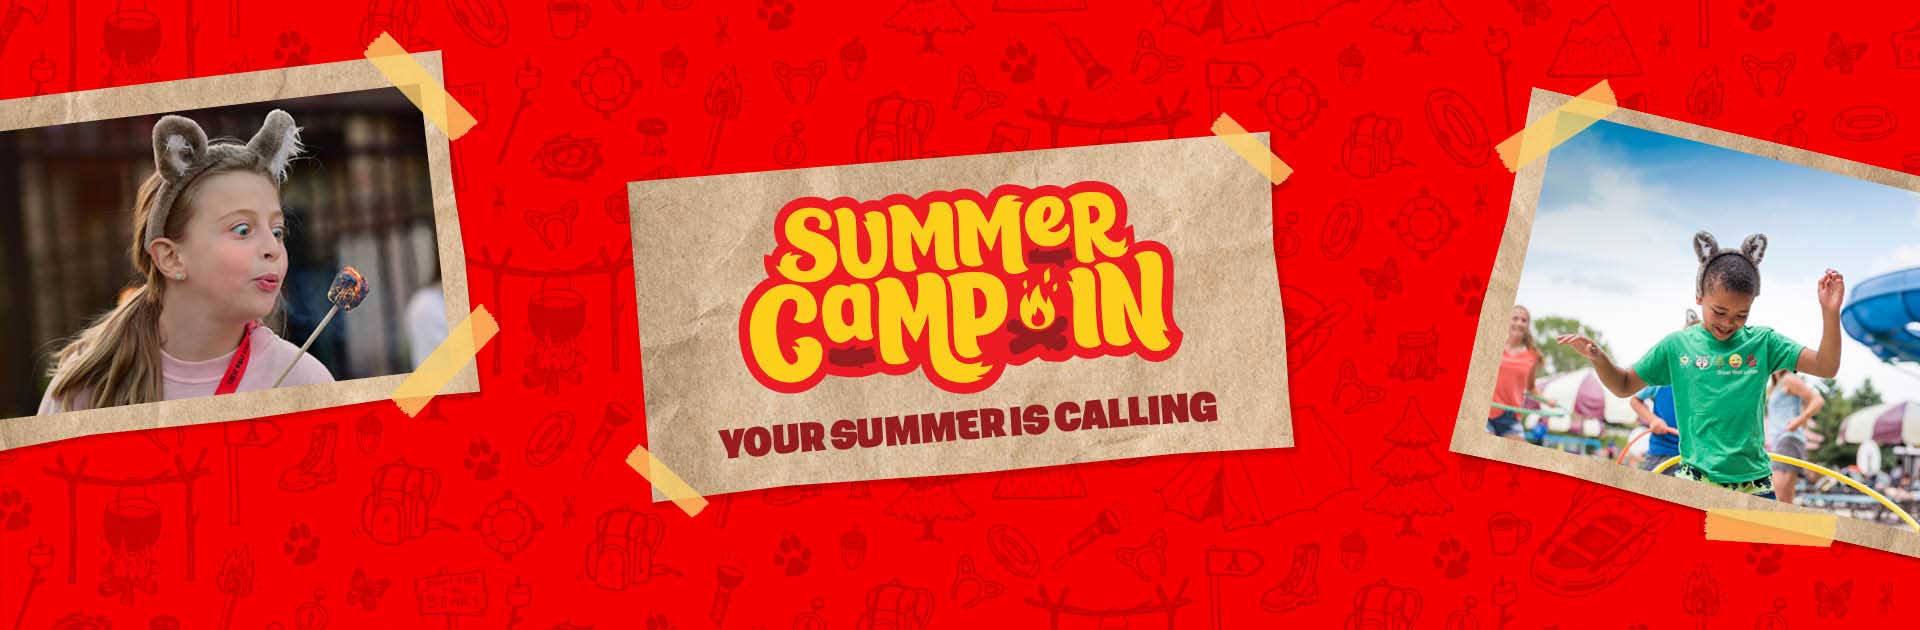 3 scrapbook like pictures on a red background with summer camp-in logo